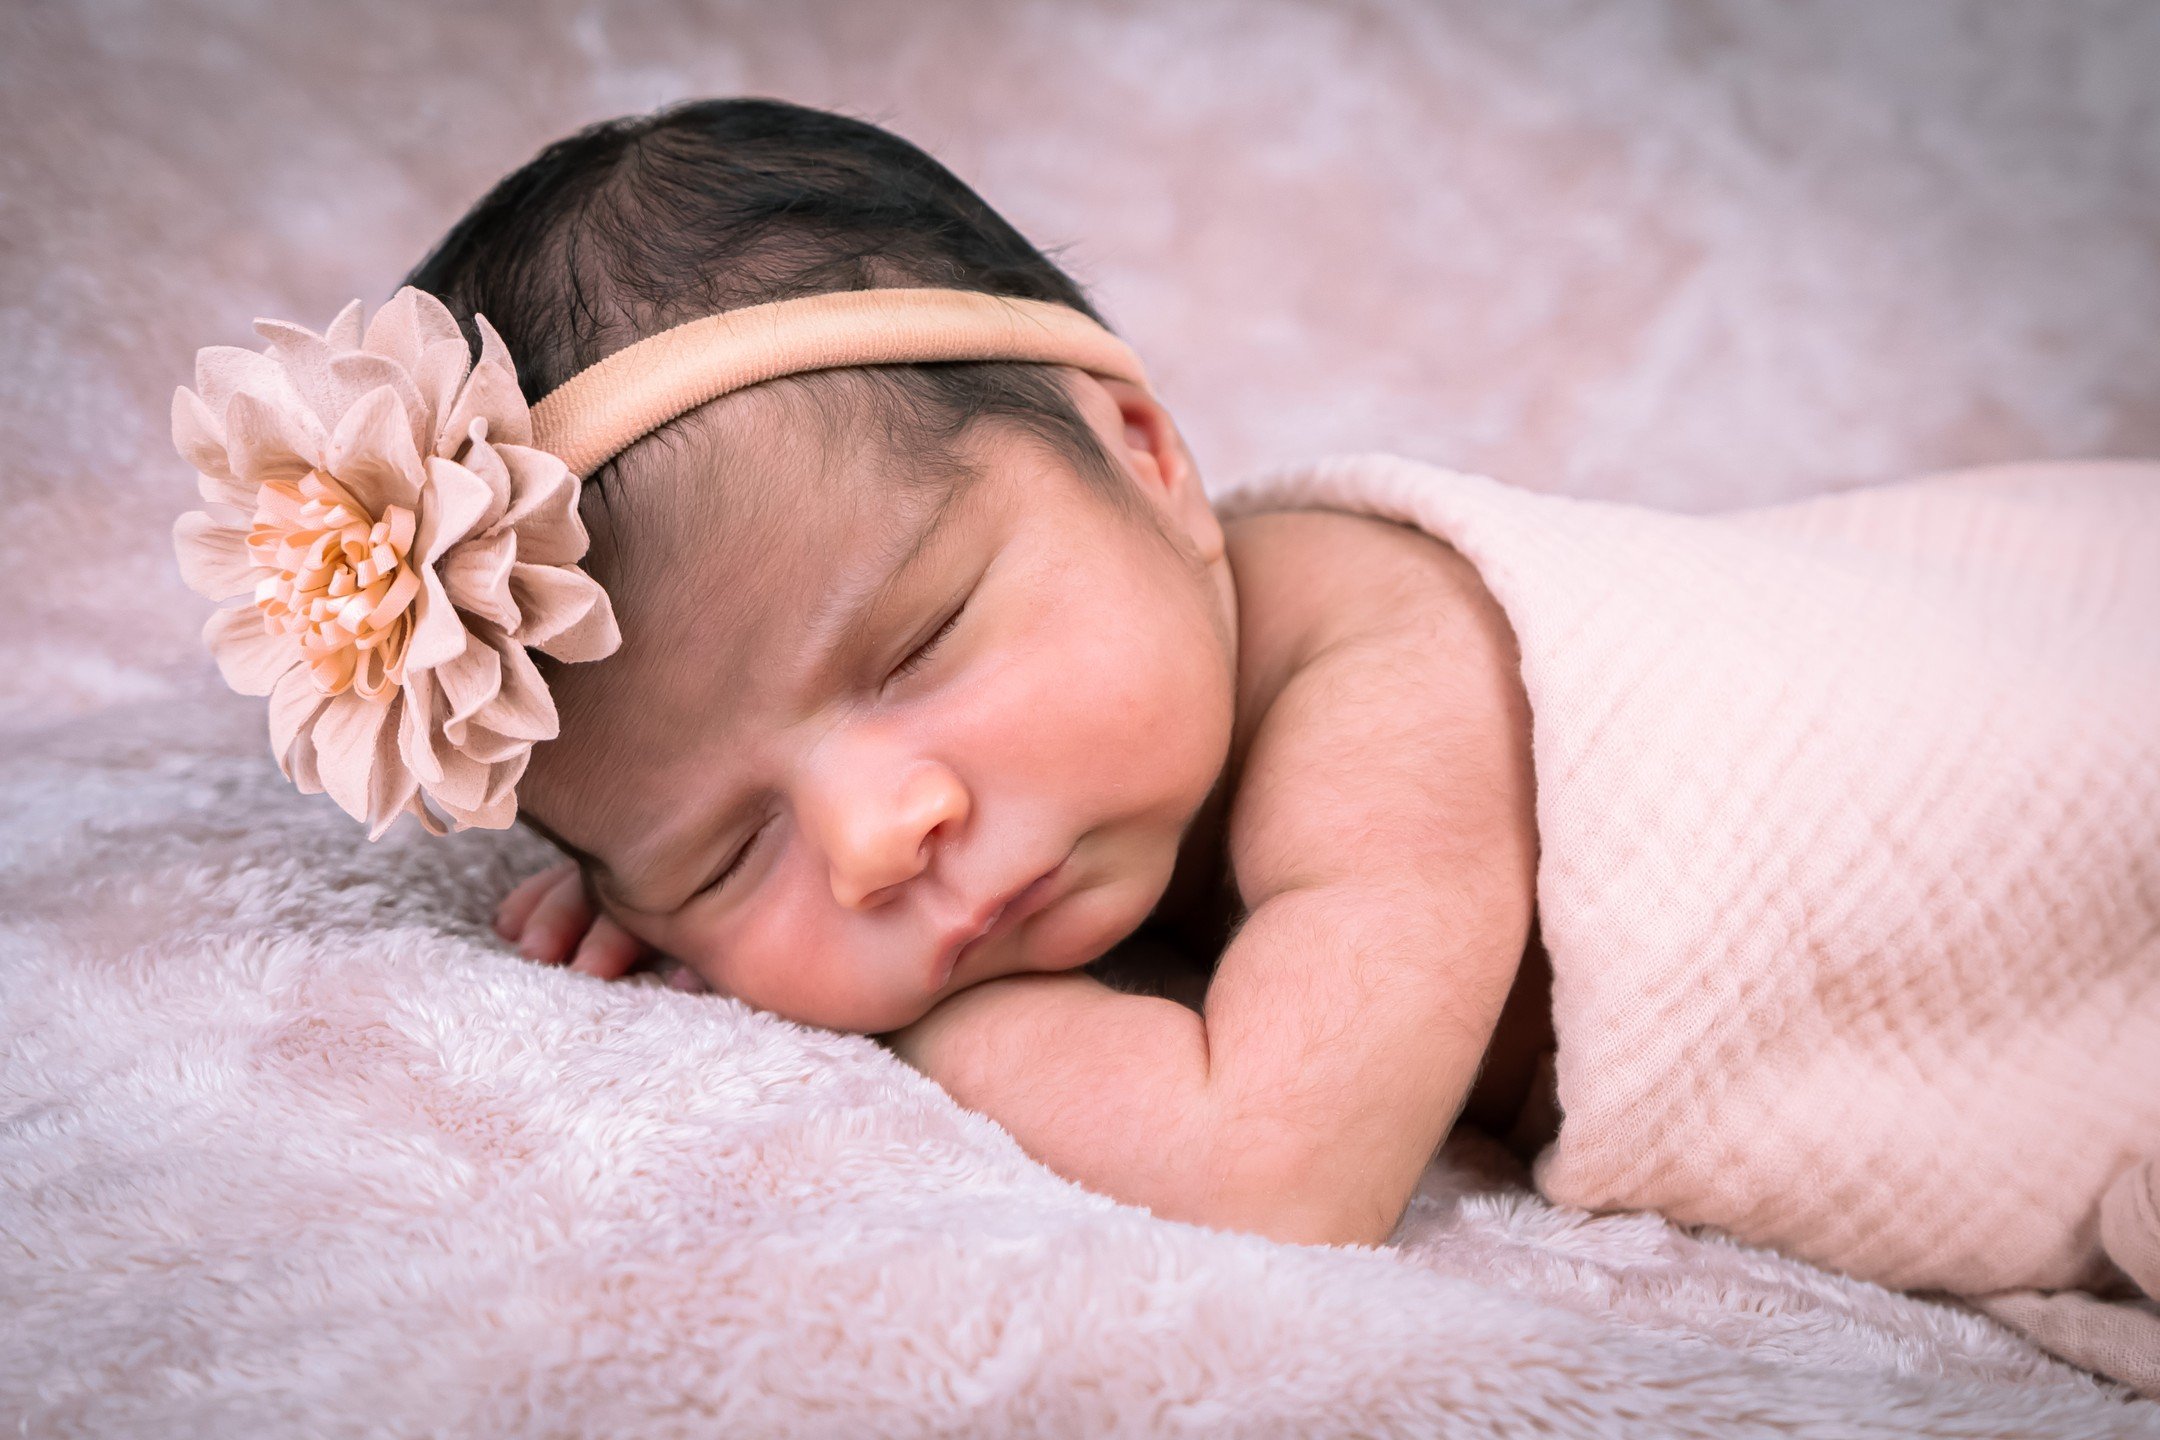 Newborn photography

we create memories with safety and love for your baby.

discounts available in Florida
#newborn #photography #babysphotography #newbornphotography #newbornphotographer 

Little start photograph

Fotograf&iacute;a de reci&eacute;n